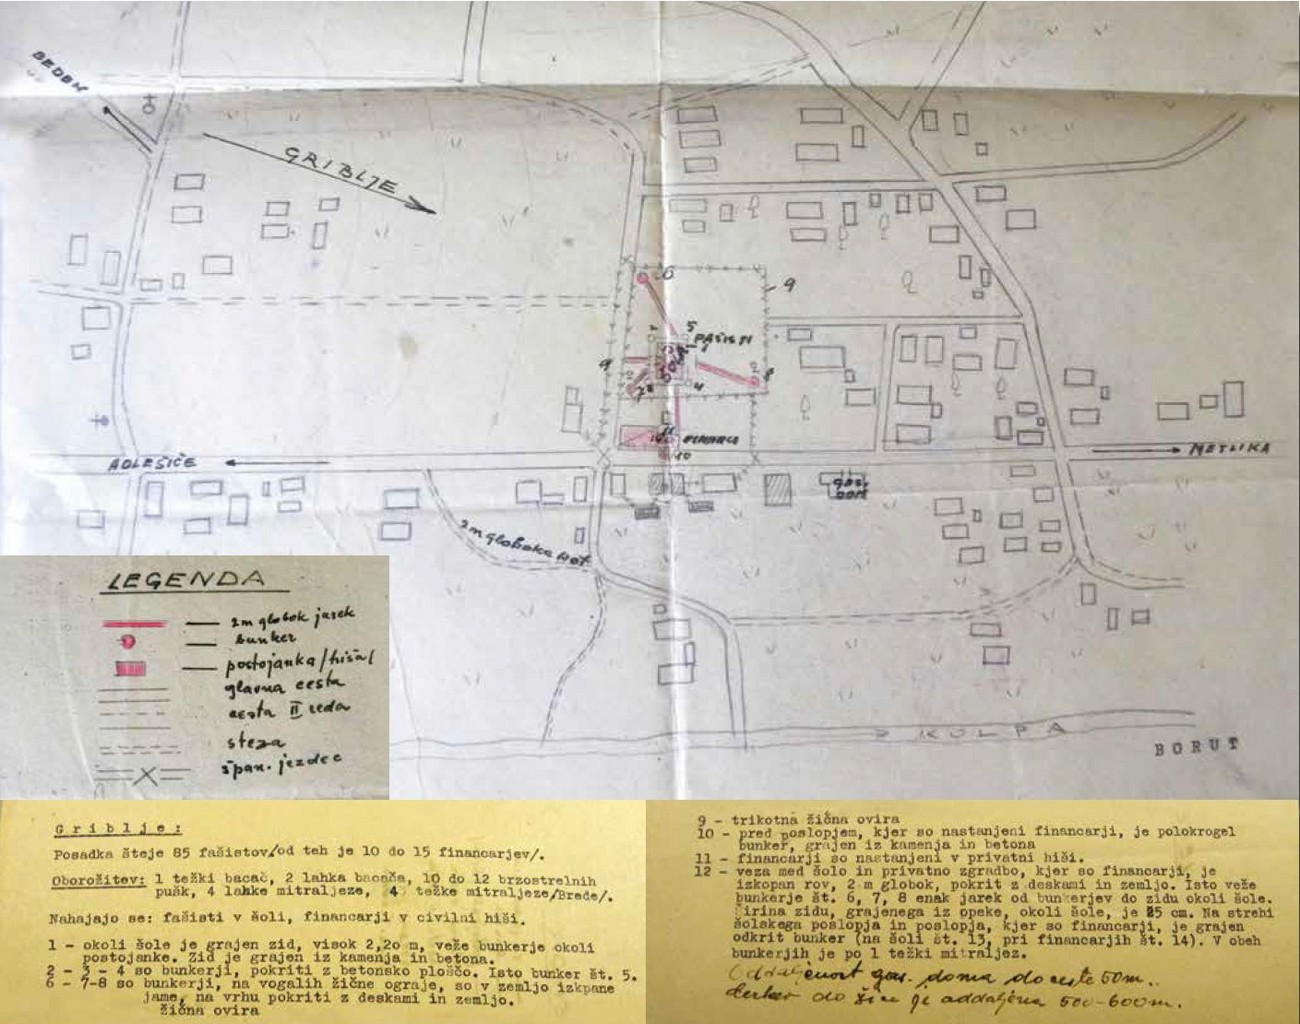 On 8 April 1942, Fascists occupied the school in Griblje, while the Financial Guard occupied a civilian house. The post in Griblje was enclosed by barbed wire and fortified with five concrete bunkers and three bunkers dug into the ground, as well as with a stone and concrete wall. They also dug connecting trenches. The partisan sketch and description of the Italian post in Griblje was most likely created at the end of 1942 or in the first half of 1943. Archives of the RS.